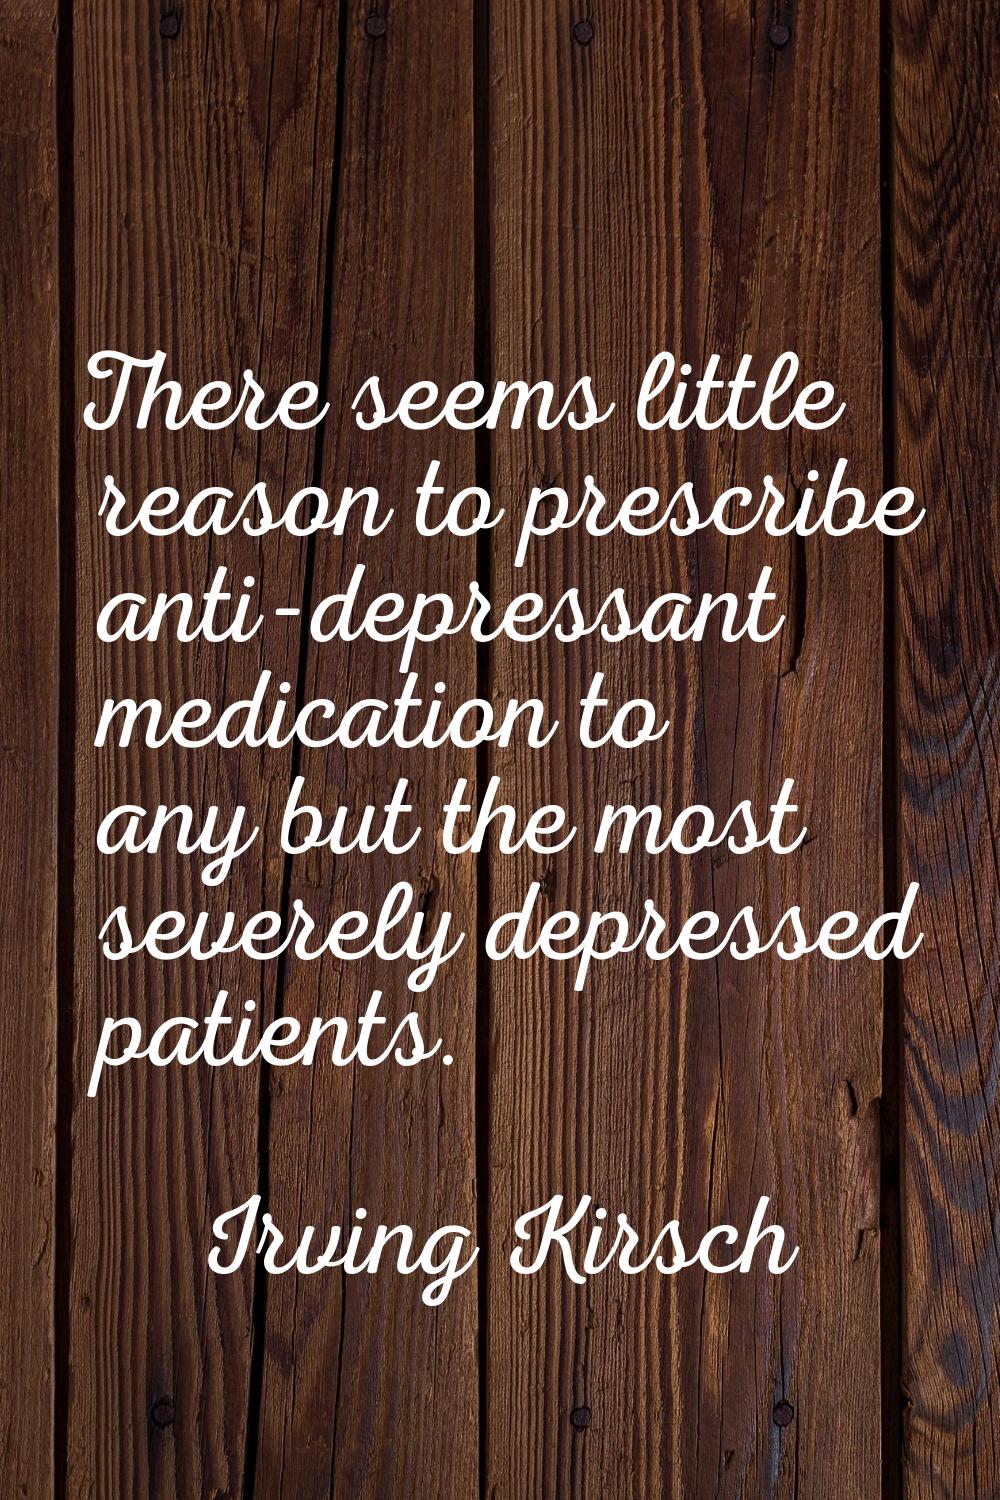 There seems little reason to prescribe anti-depressant medication to any but the most severely depr